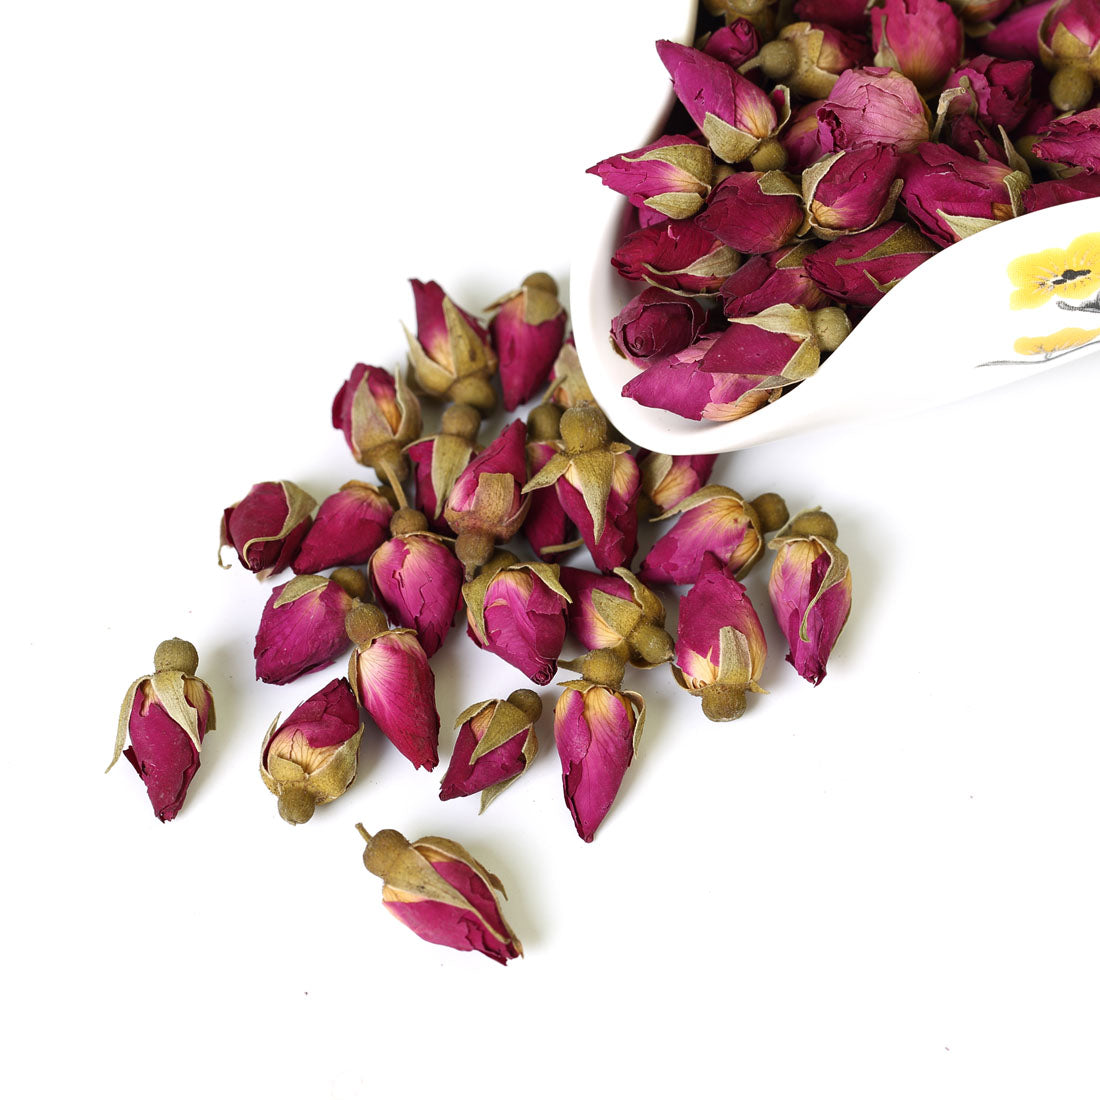 Organic Dried Red Rose Petals and Buds, Edible Flowers, Herb Tea 